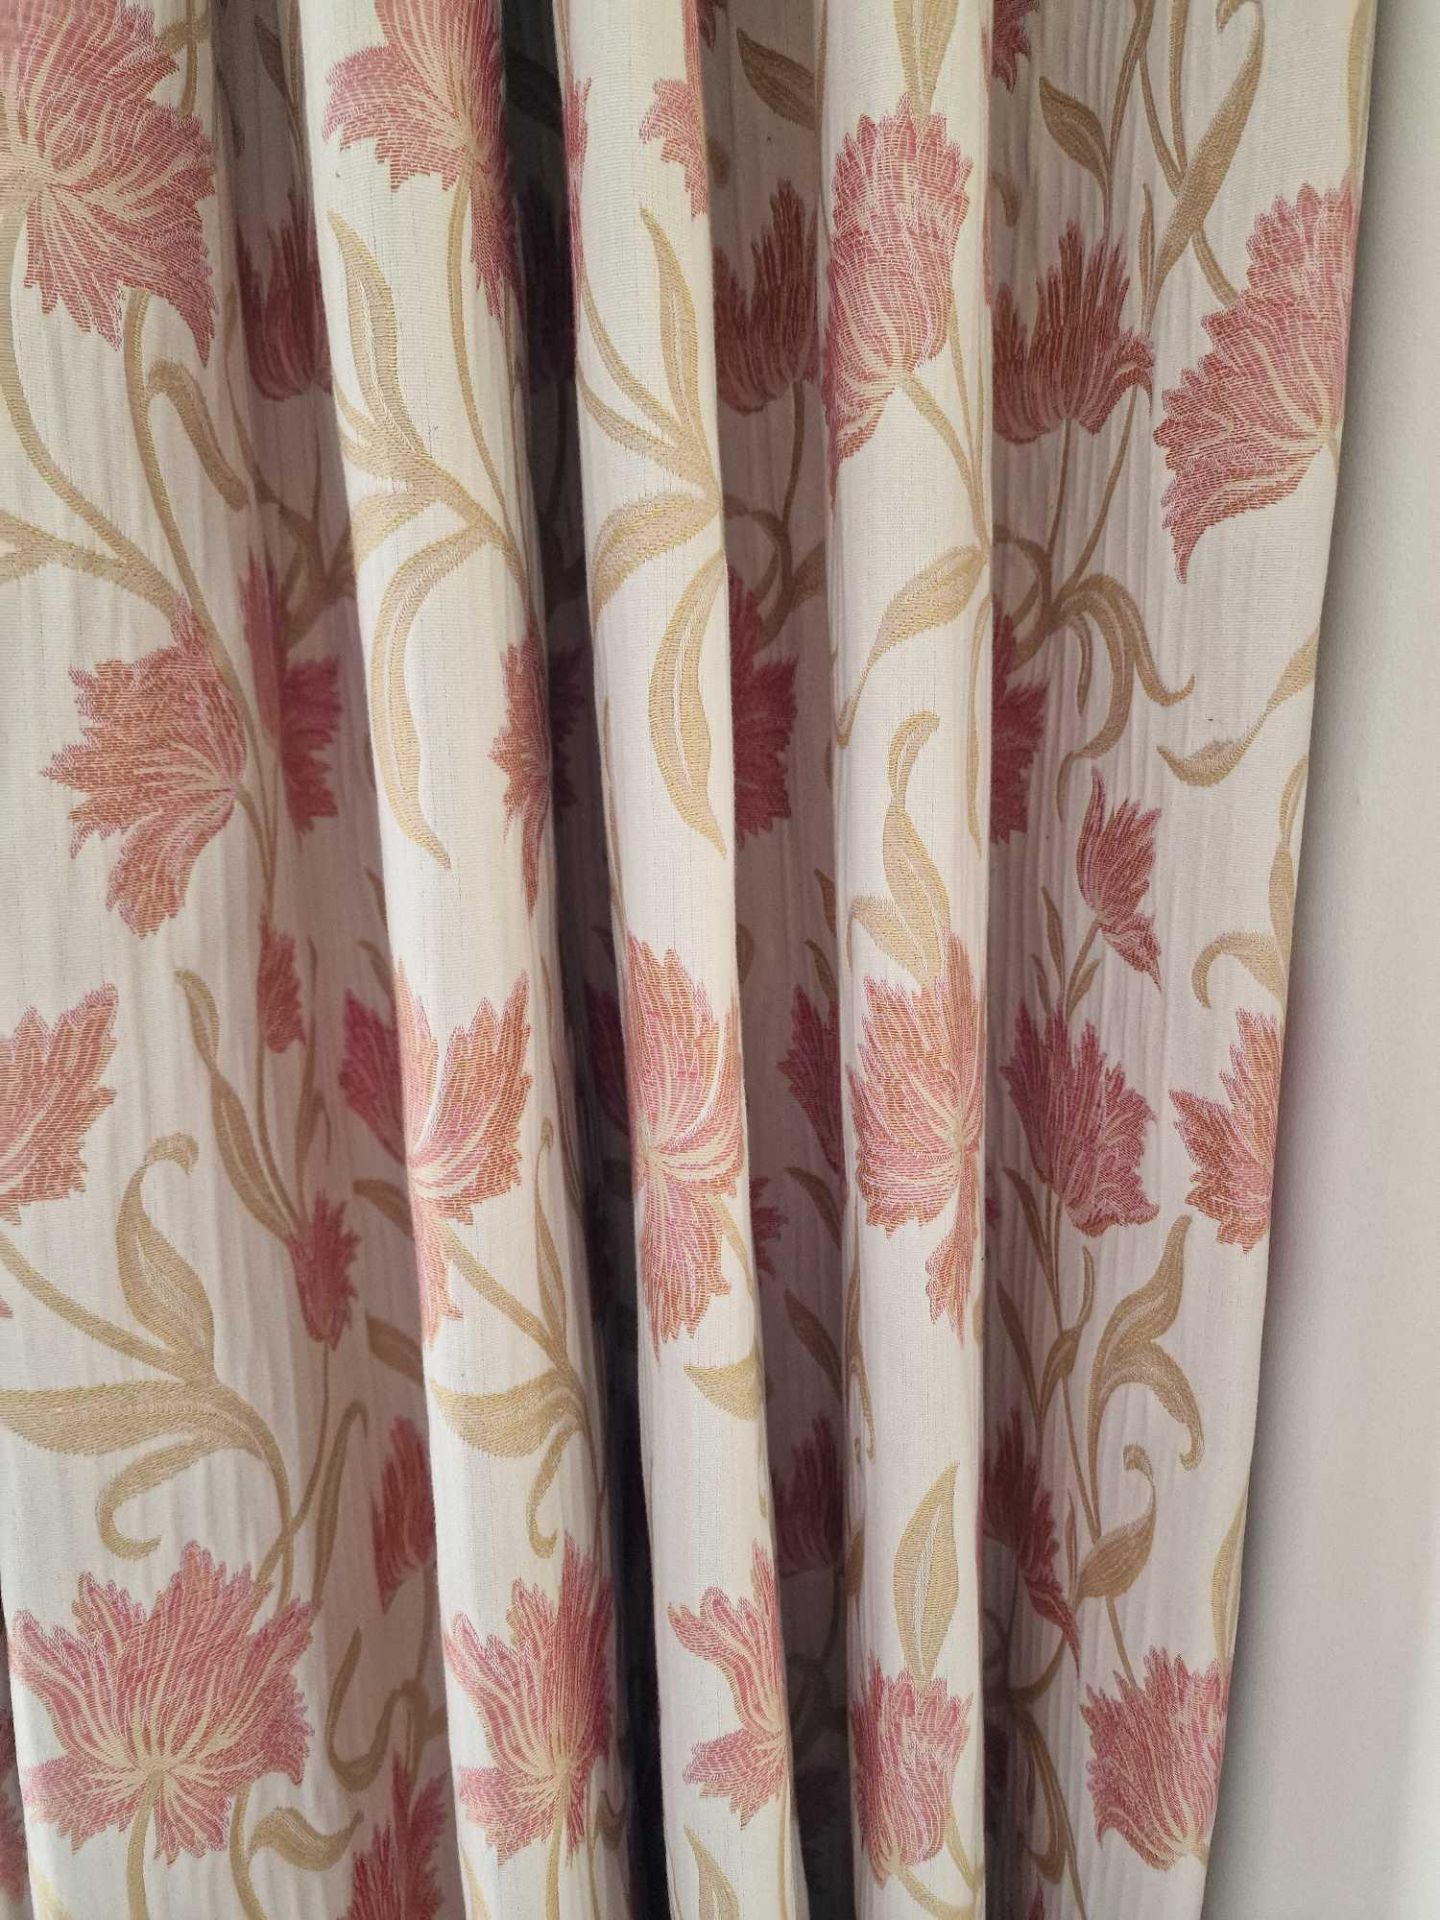 A Pair Of Drapes Heavy Jacquard Sophia Sunshine Fabric Neutral With Autumnal Leaves Pattern - Bild 2 aus 2